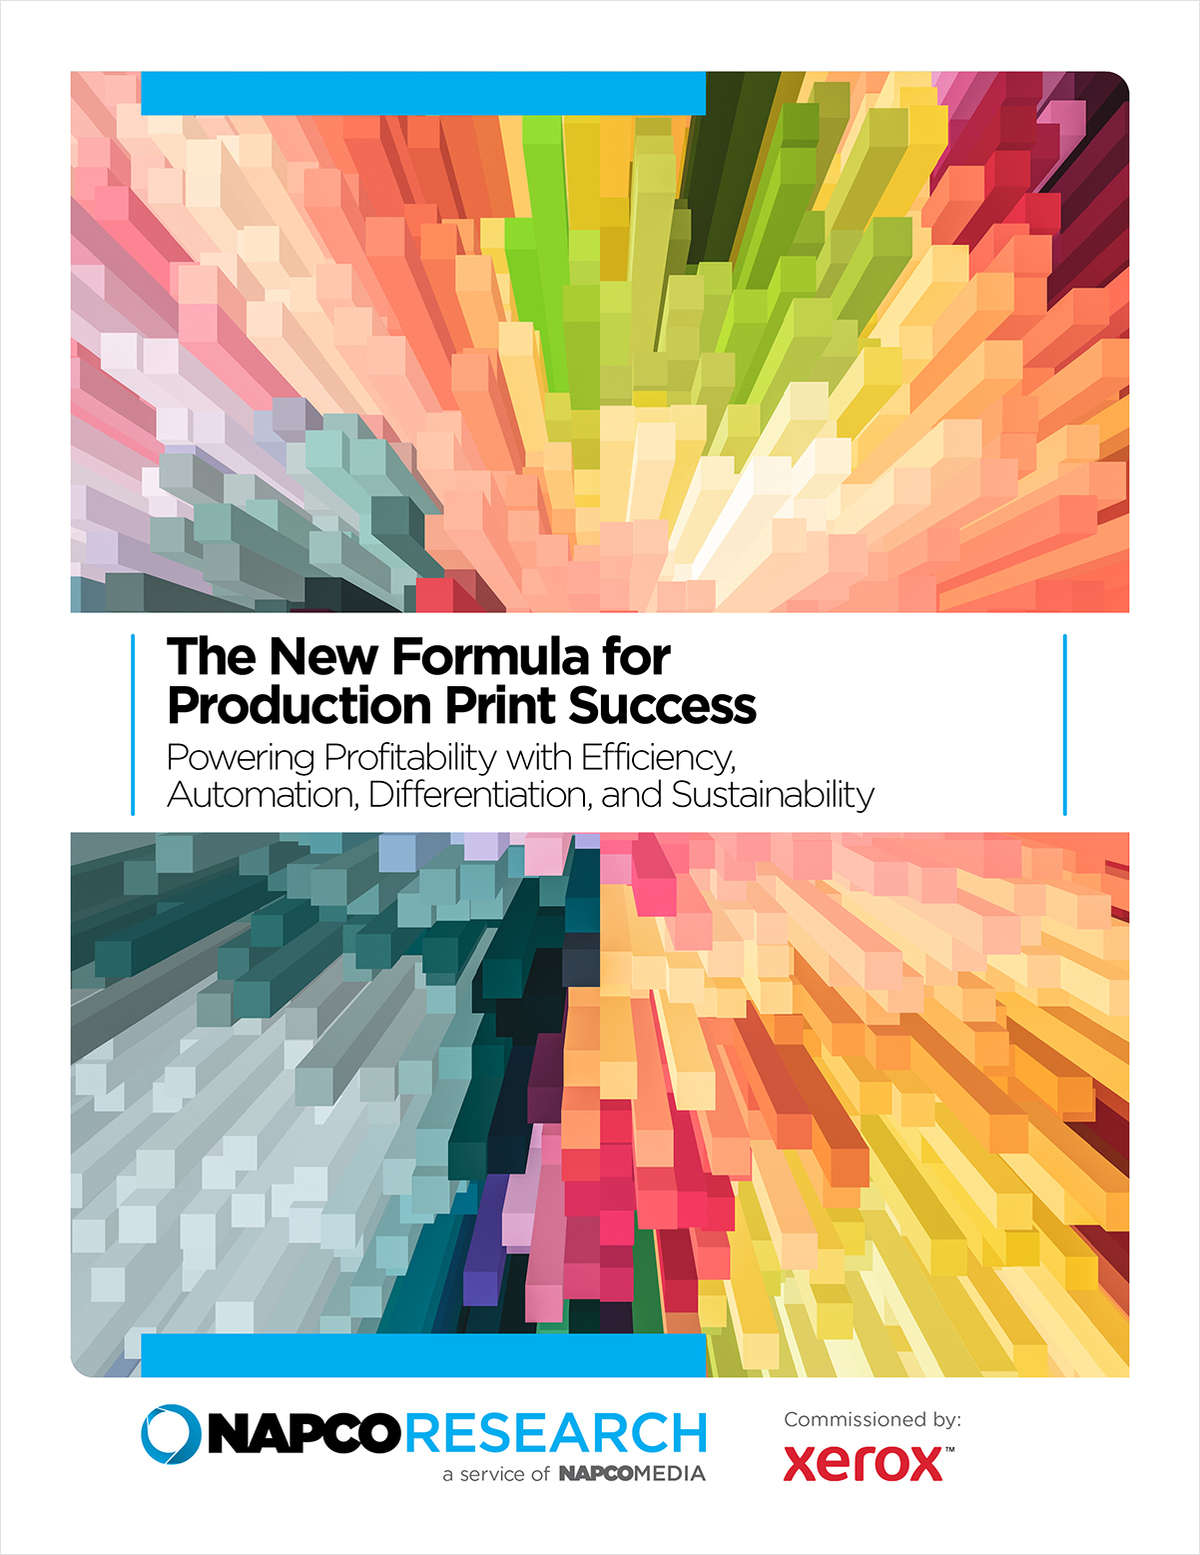 The New Formula for Production Print Success